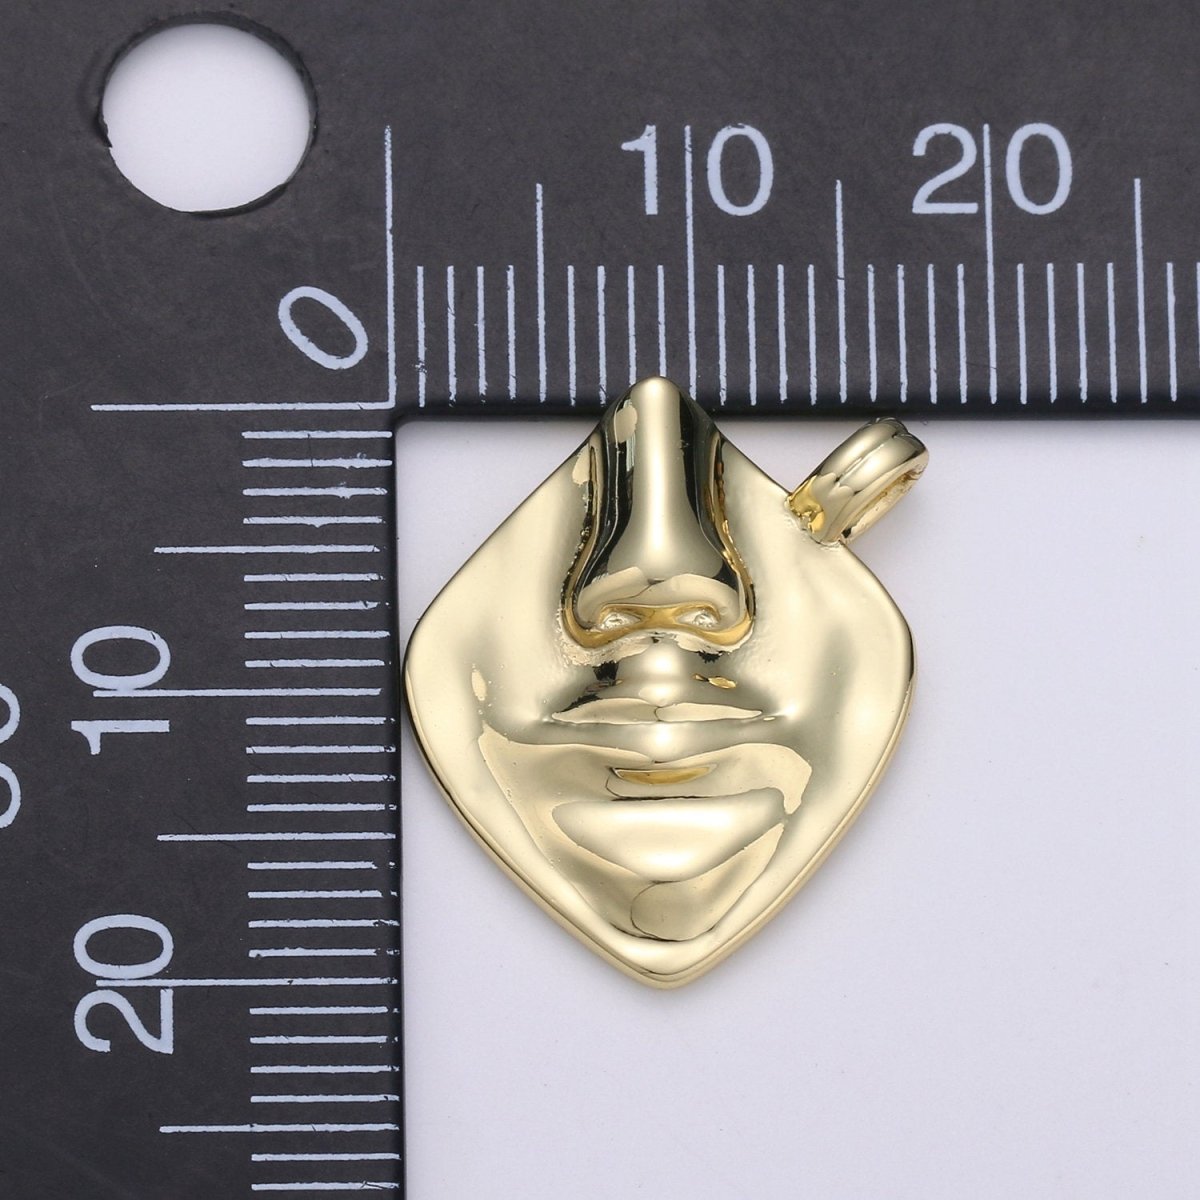 14k Gold Filled Face Charm Necklace pendants, Silhouette Charms Cameo Pendant Abstract Face Medallion Charm for Necklace Supply I-867 - DLUXCA